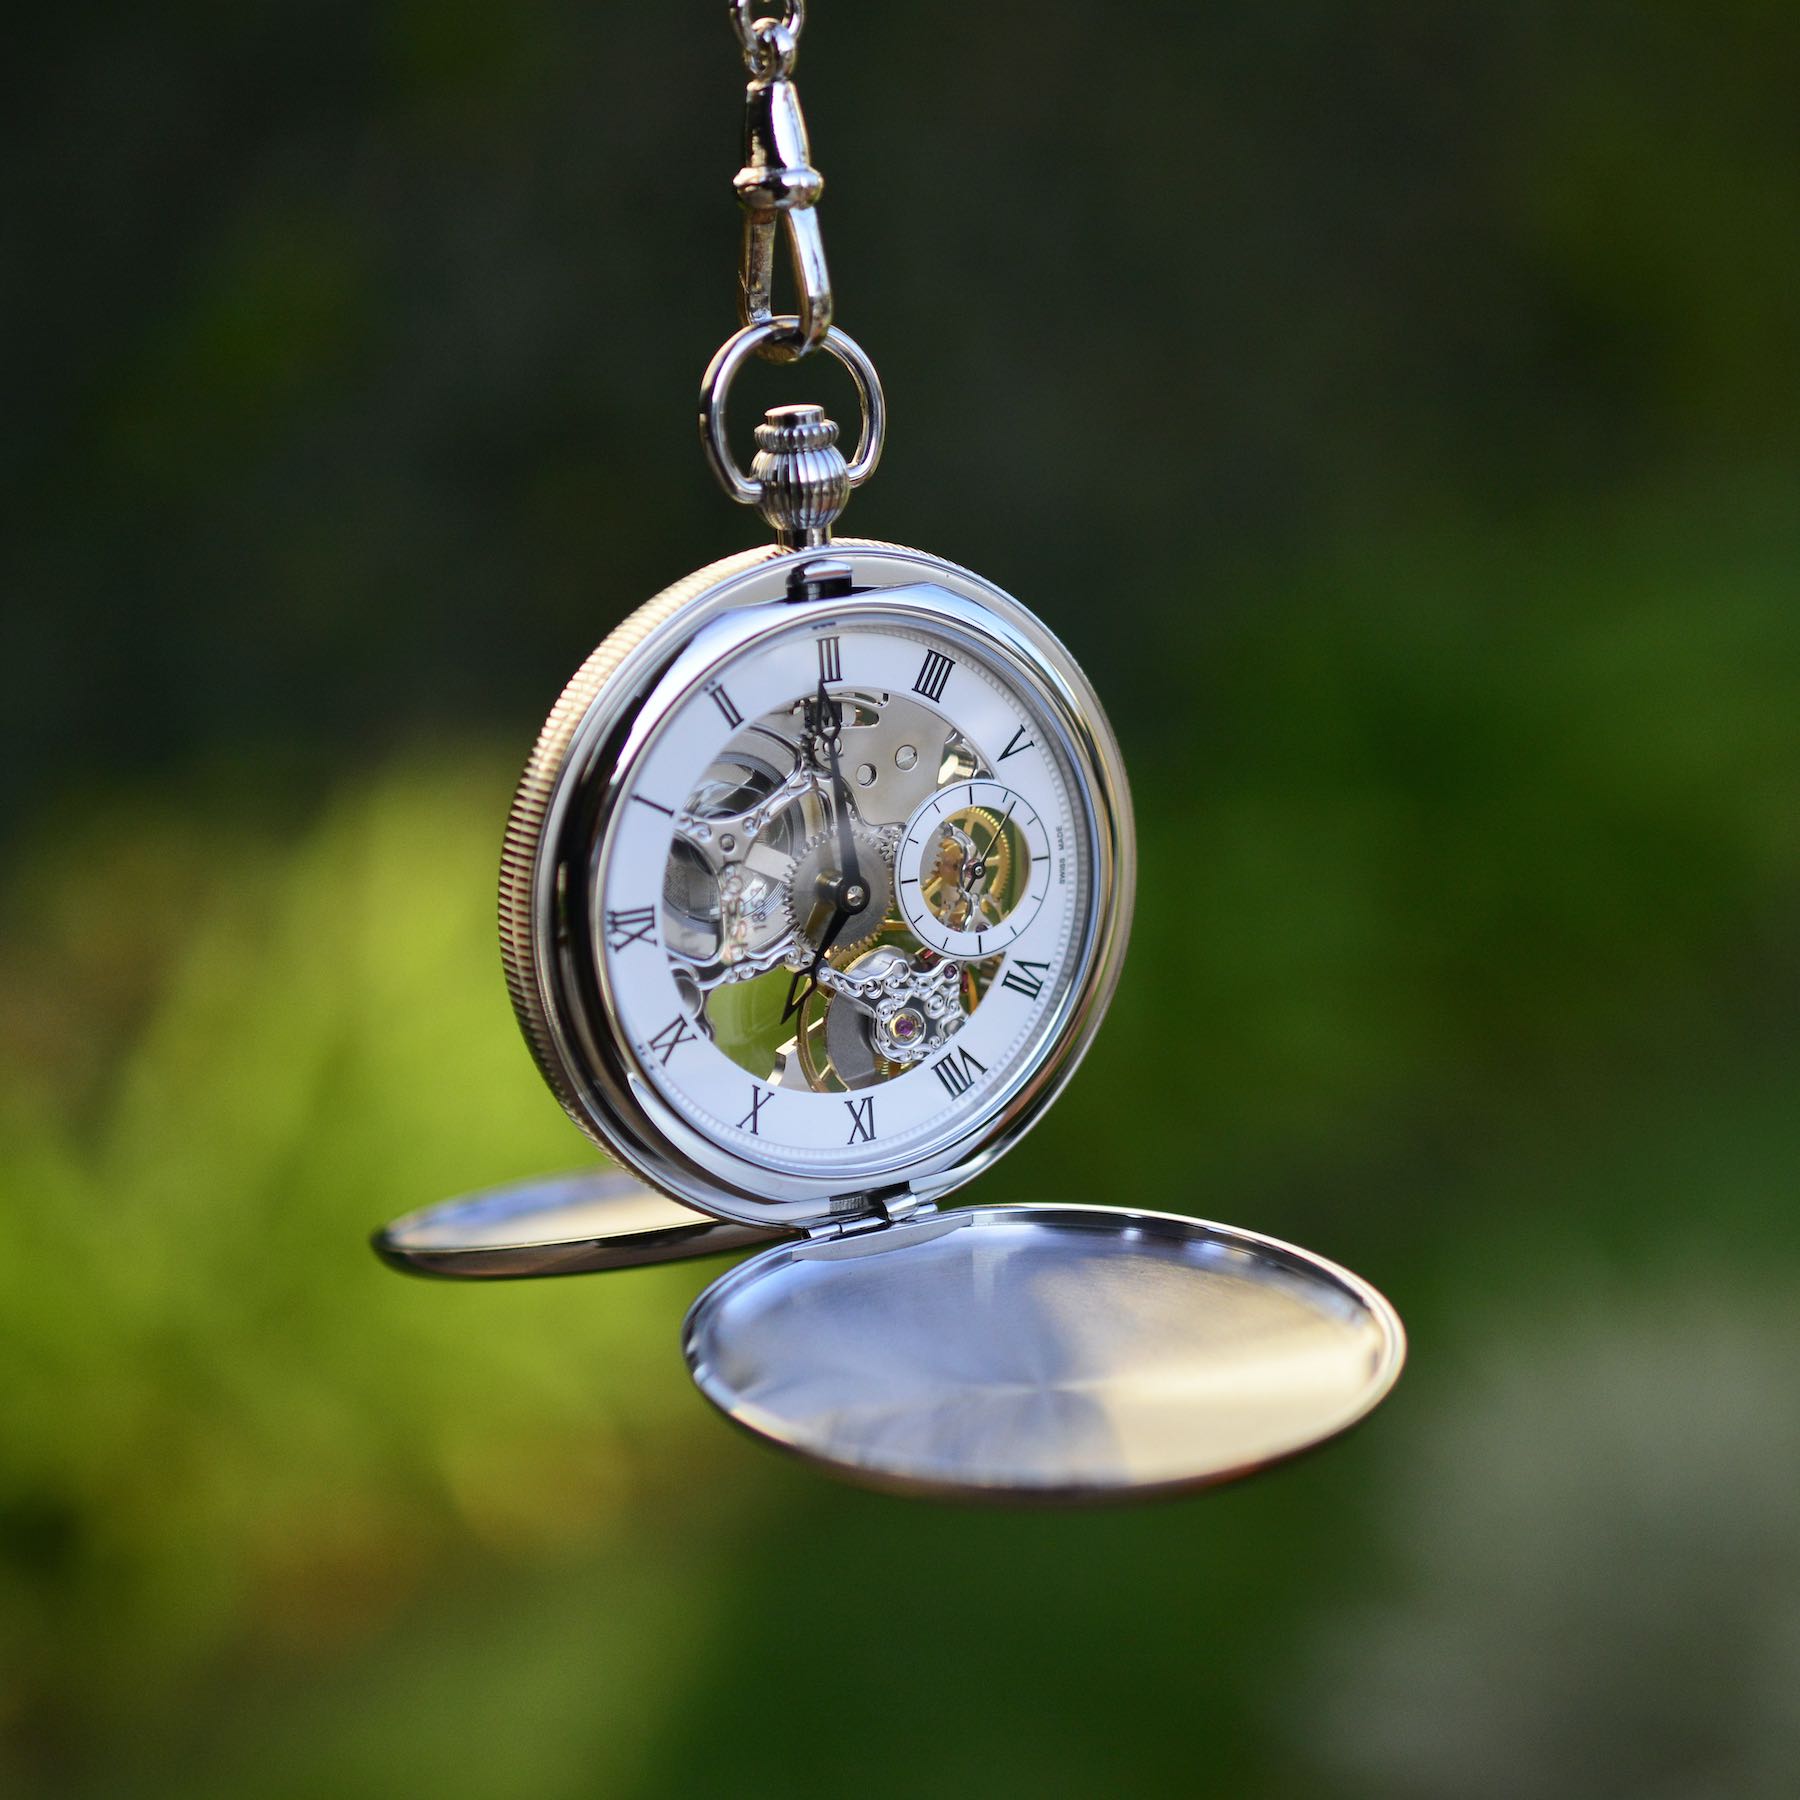 Is There Still a Place for Pocket Watches in the 21st Century